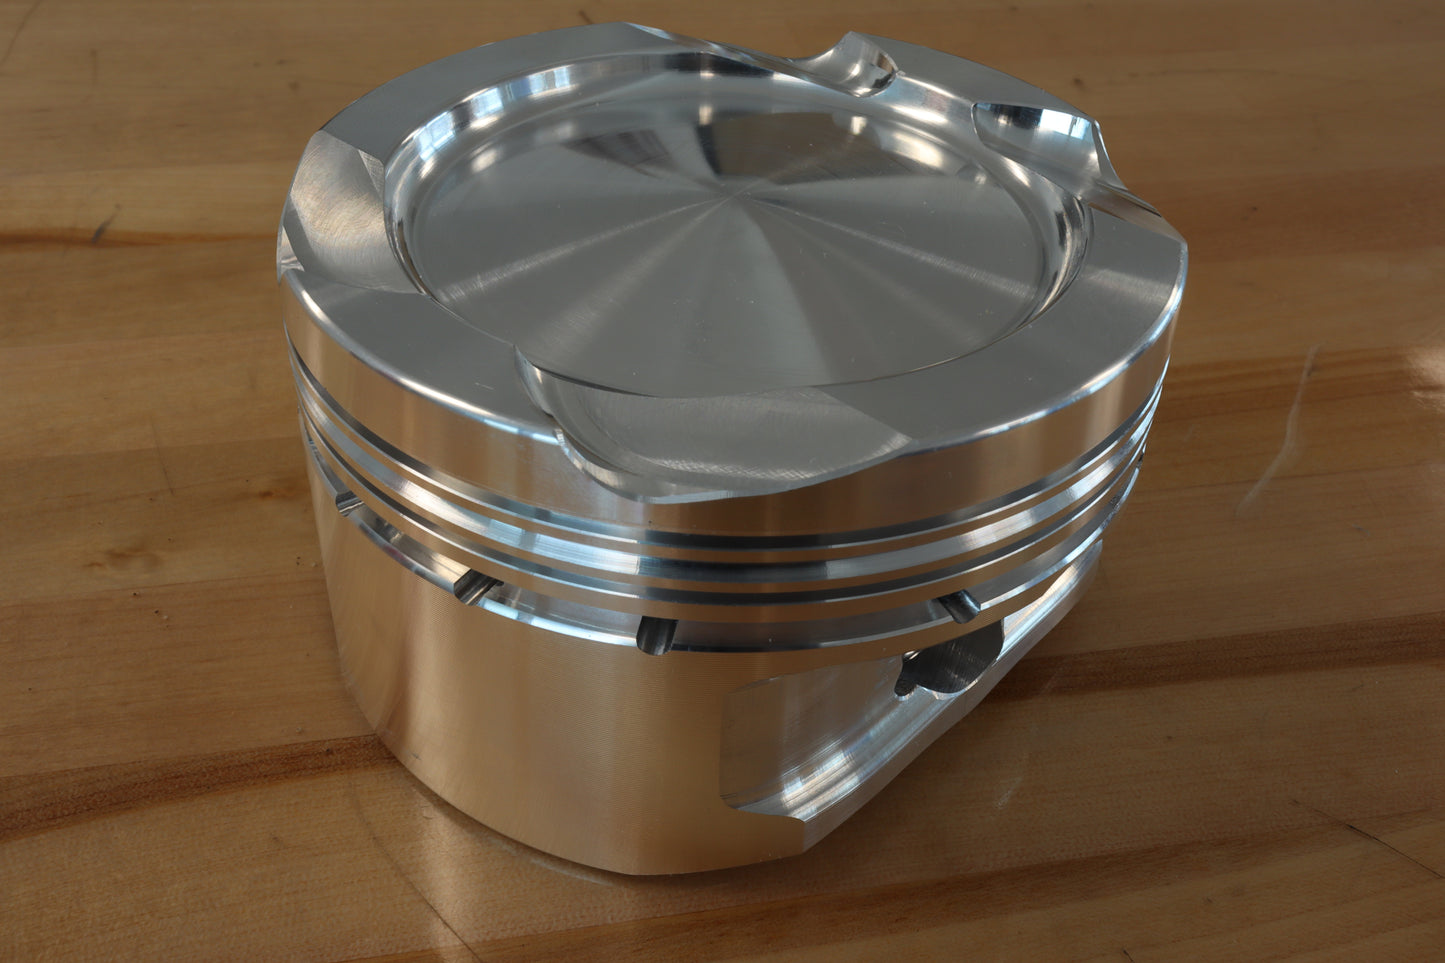 BMW S63 CP Forged Piston Set - Sleeved Block